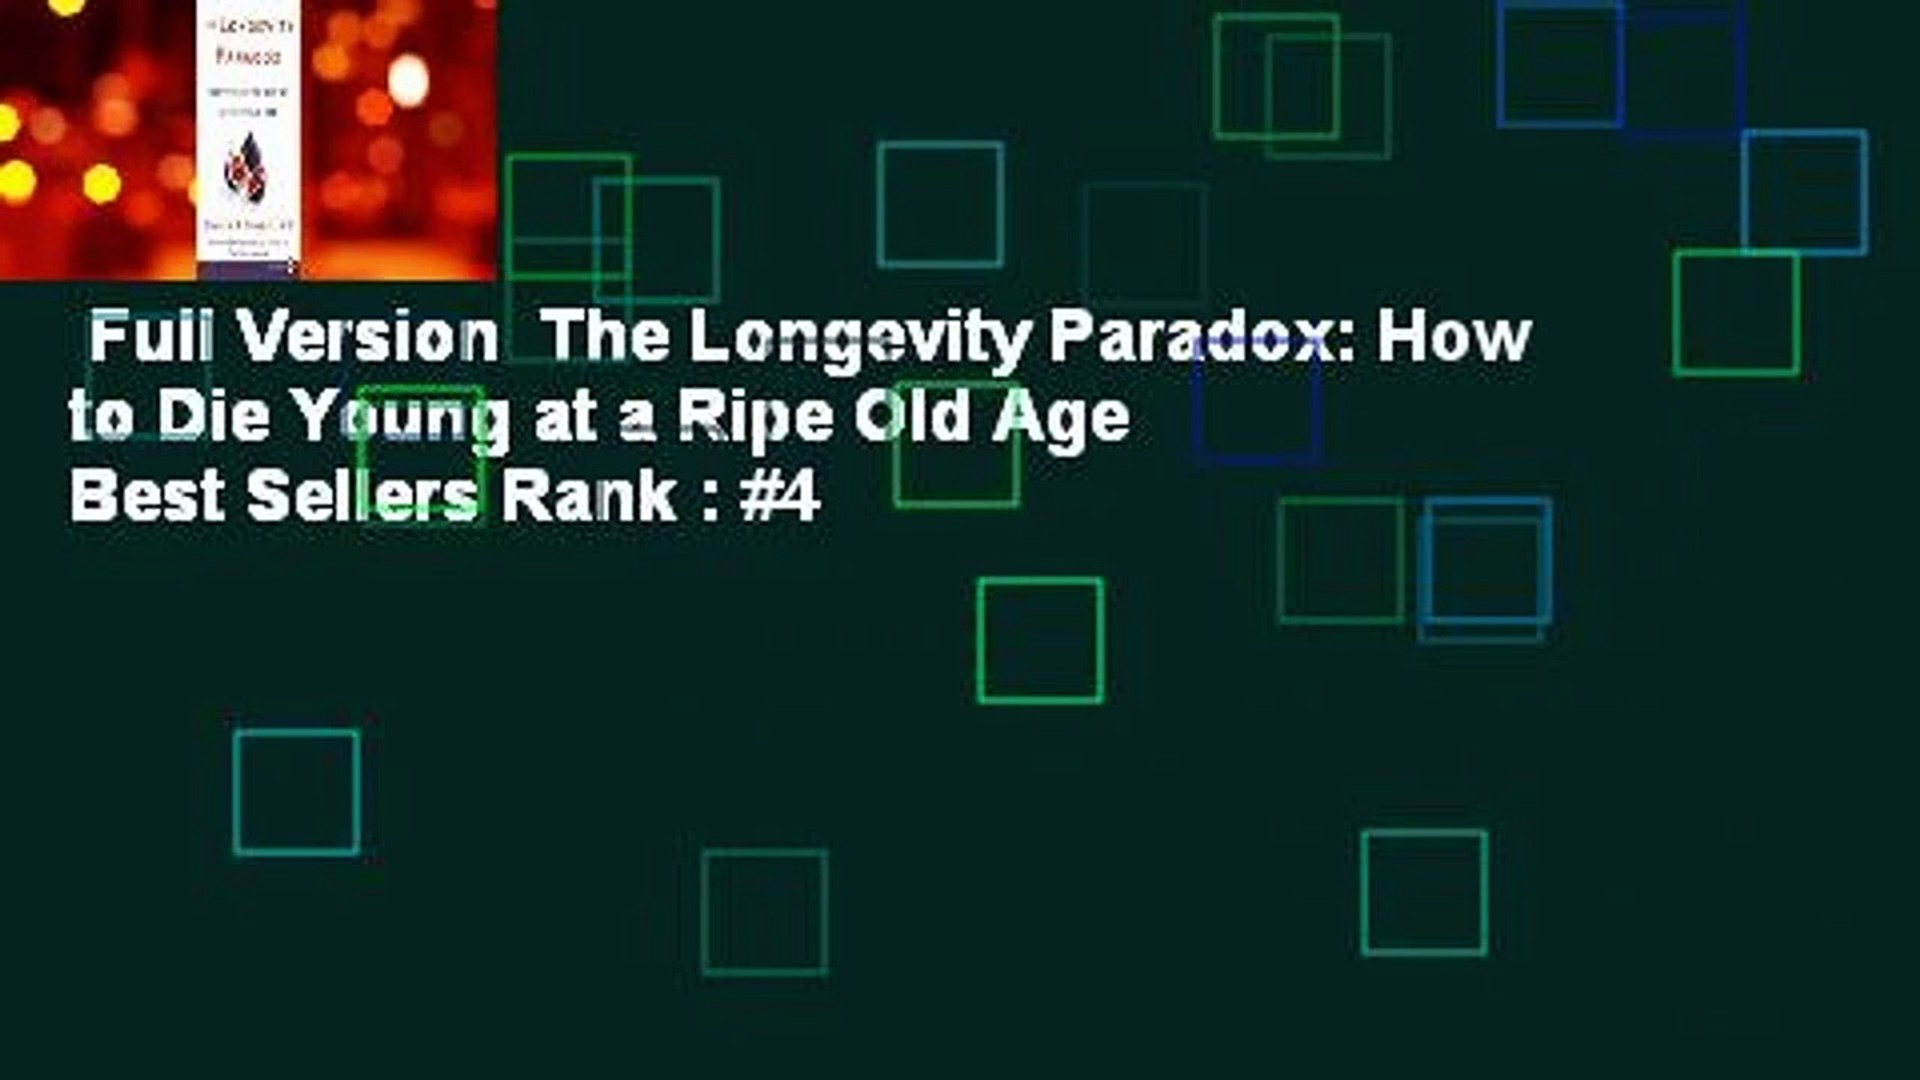 Full Version  The Longevity Paradox: How to Die Young at a Ripe Old Age  Best Sellers Rank : #4